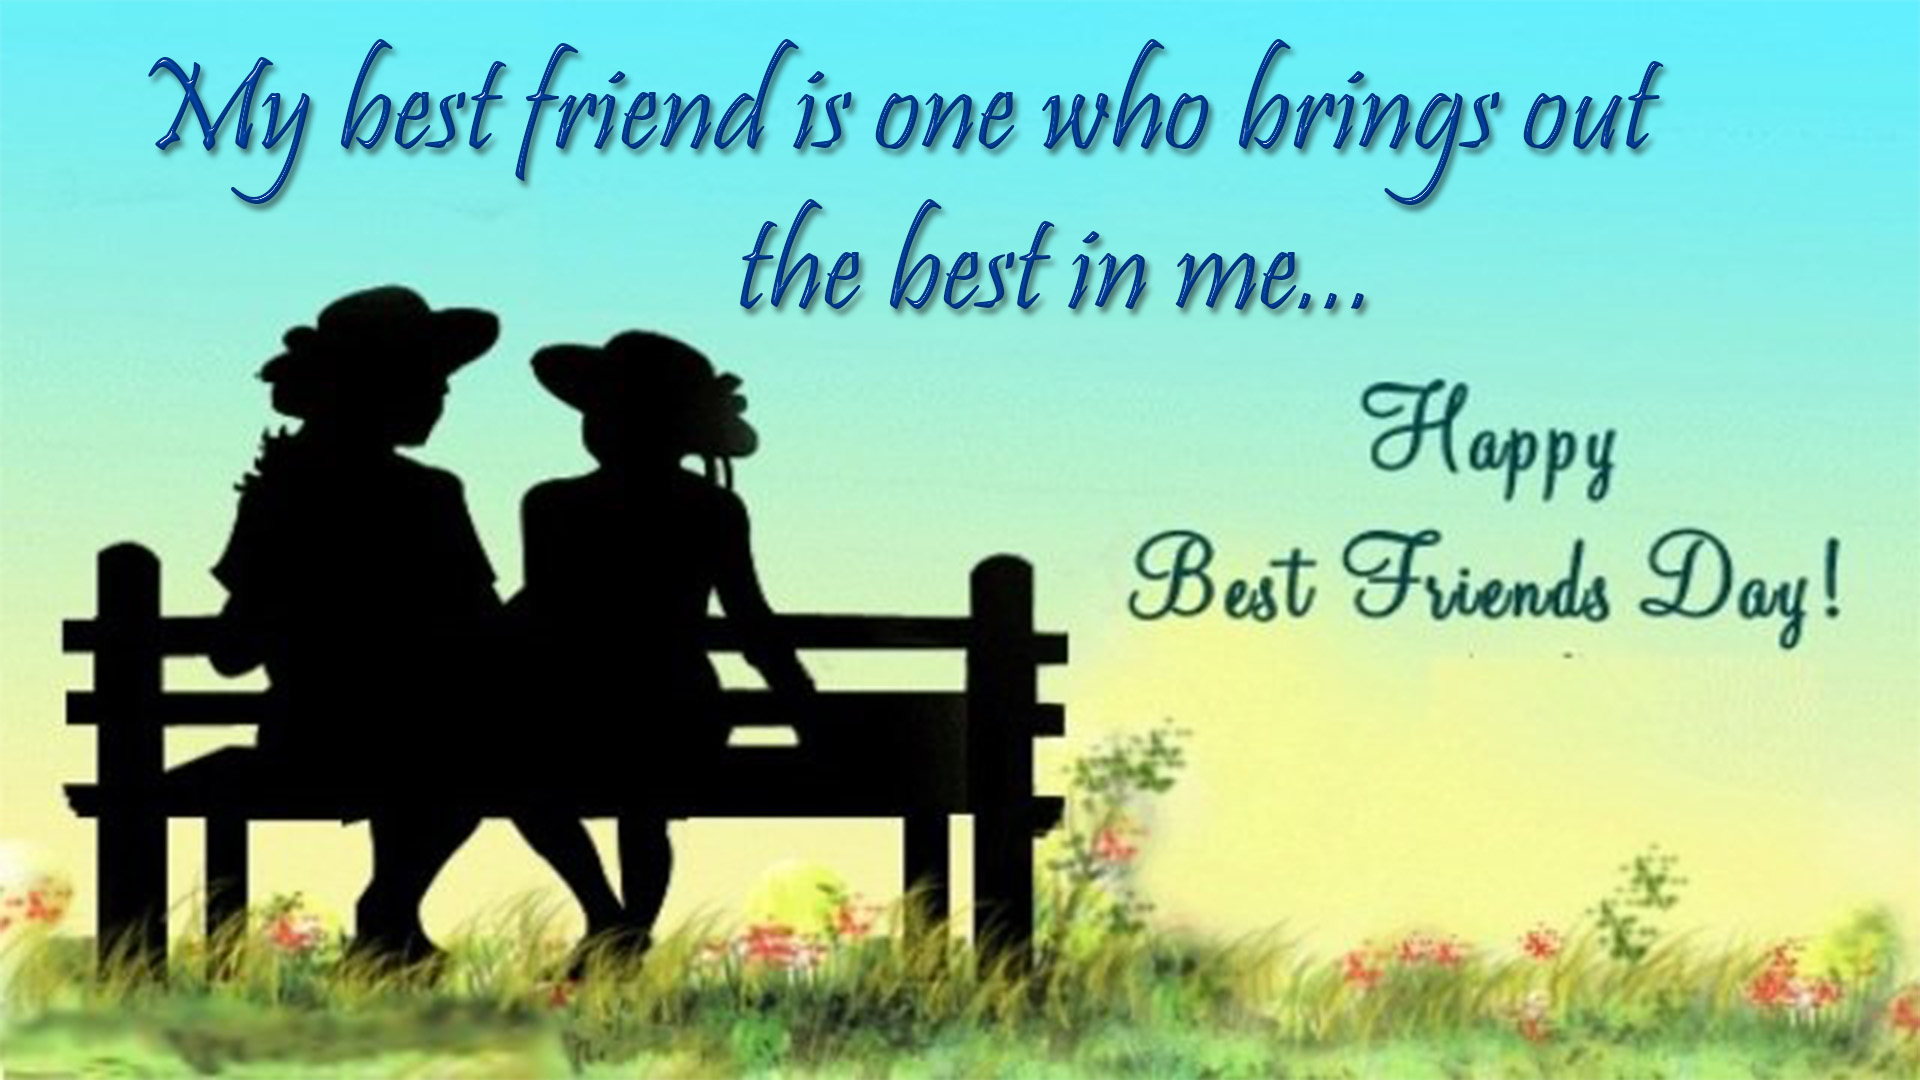 best friend day quotes hd image